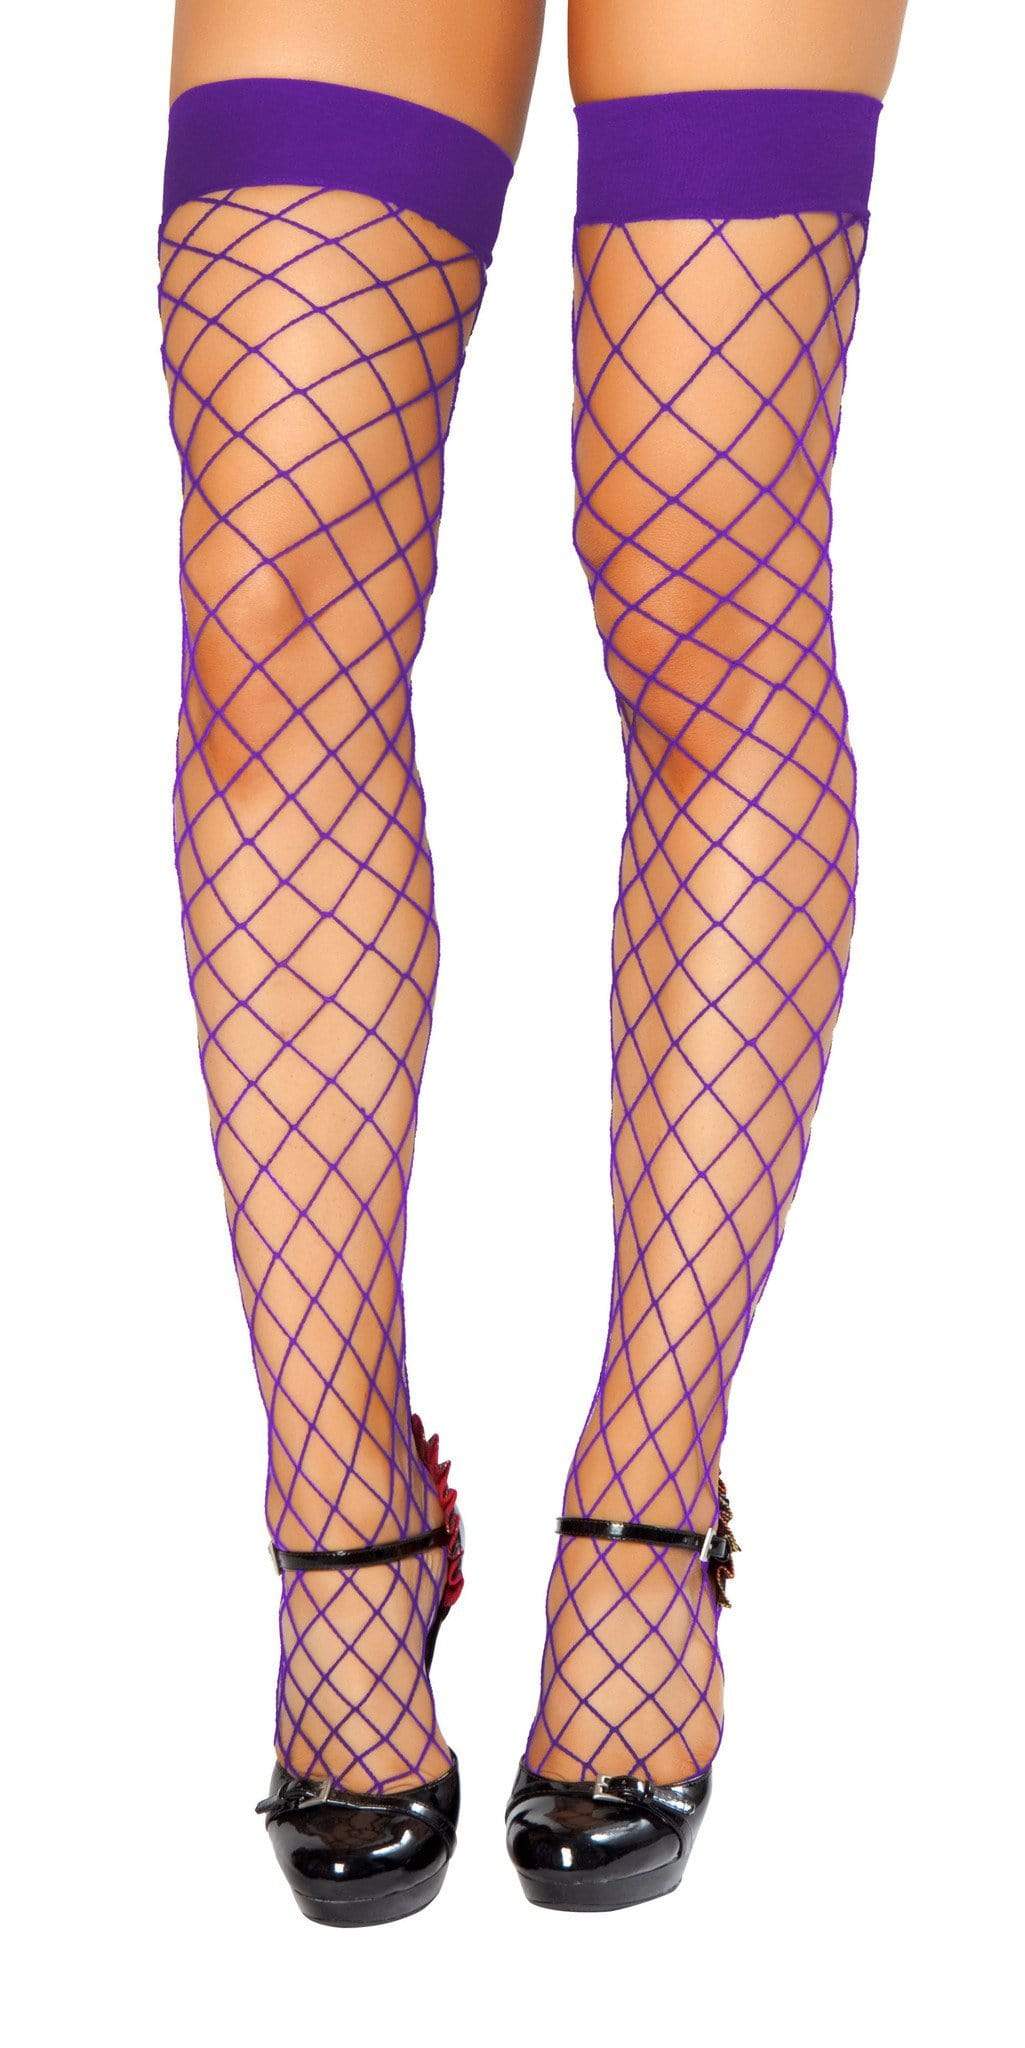 Roma Purple / One Size Purple Fence Style Fish Net Thigh High Sexy Stockings SHC-STC207-PURPLE-R Apparel & Accessories > Clothing > Underwear & Socks > Lingerie